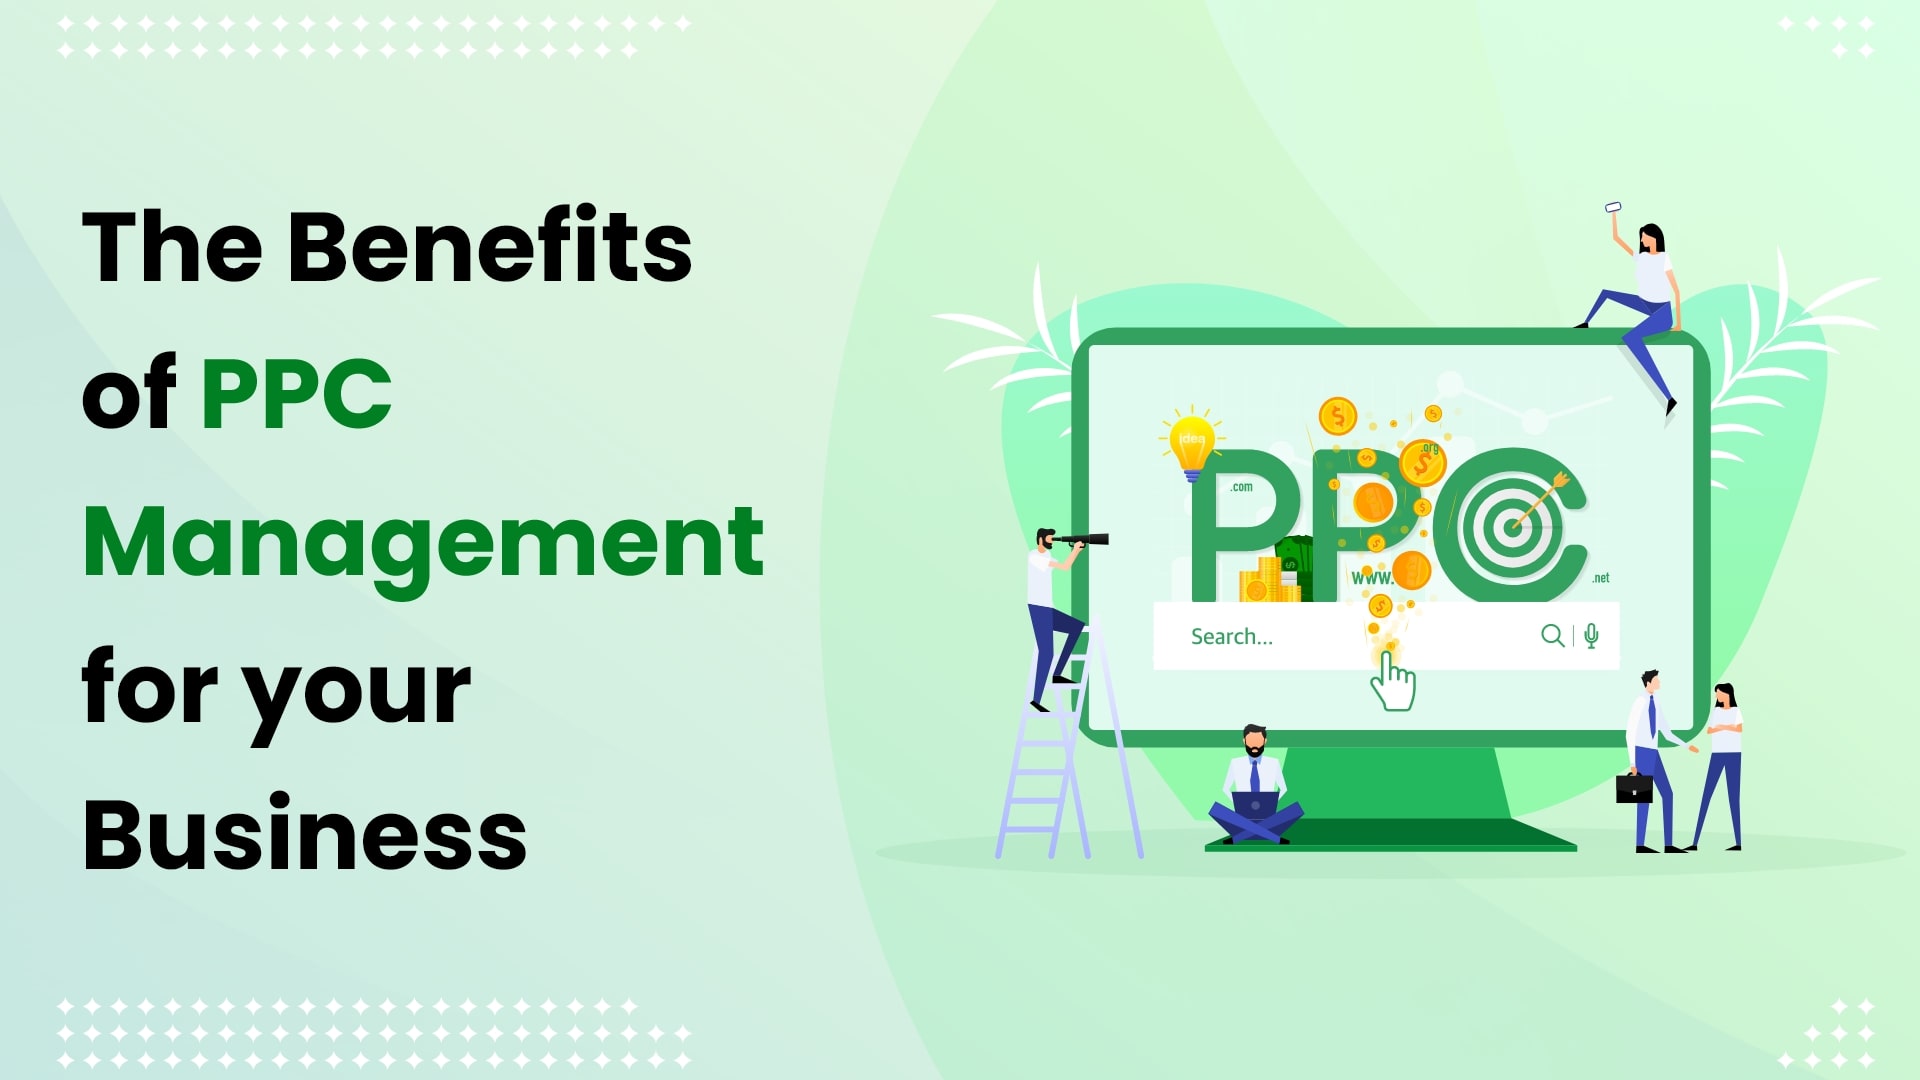 The Benefits of PPC Management for your Business